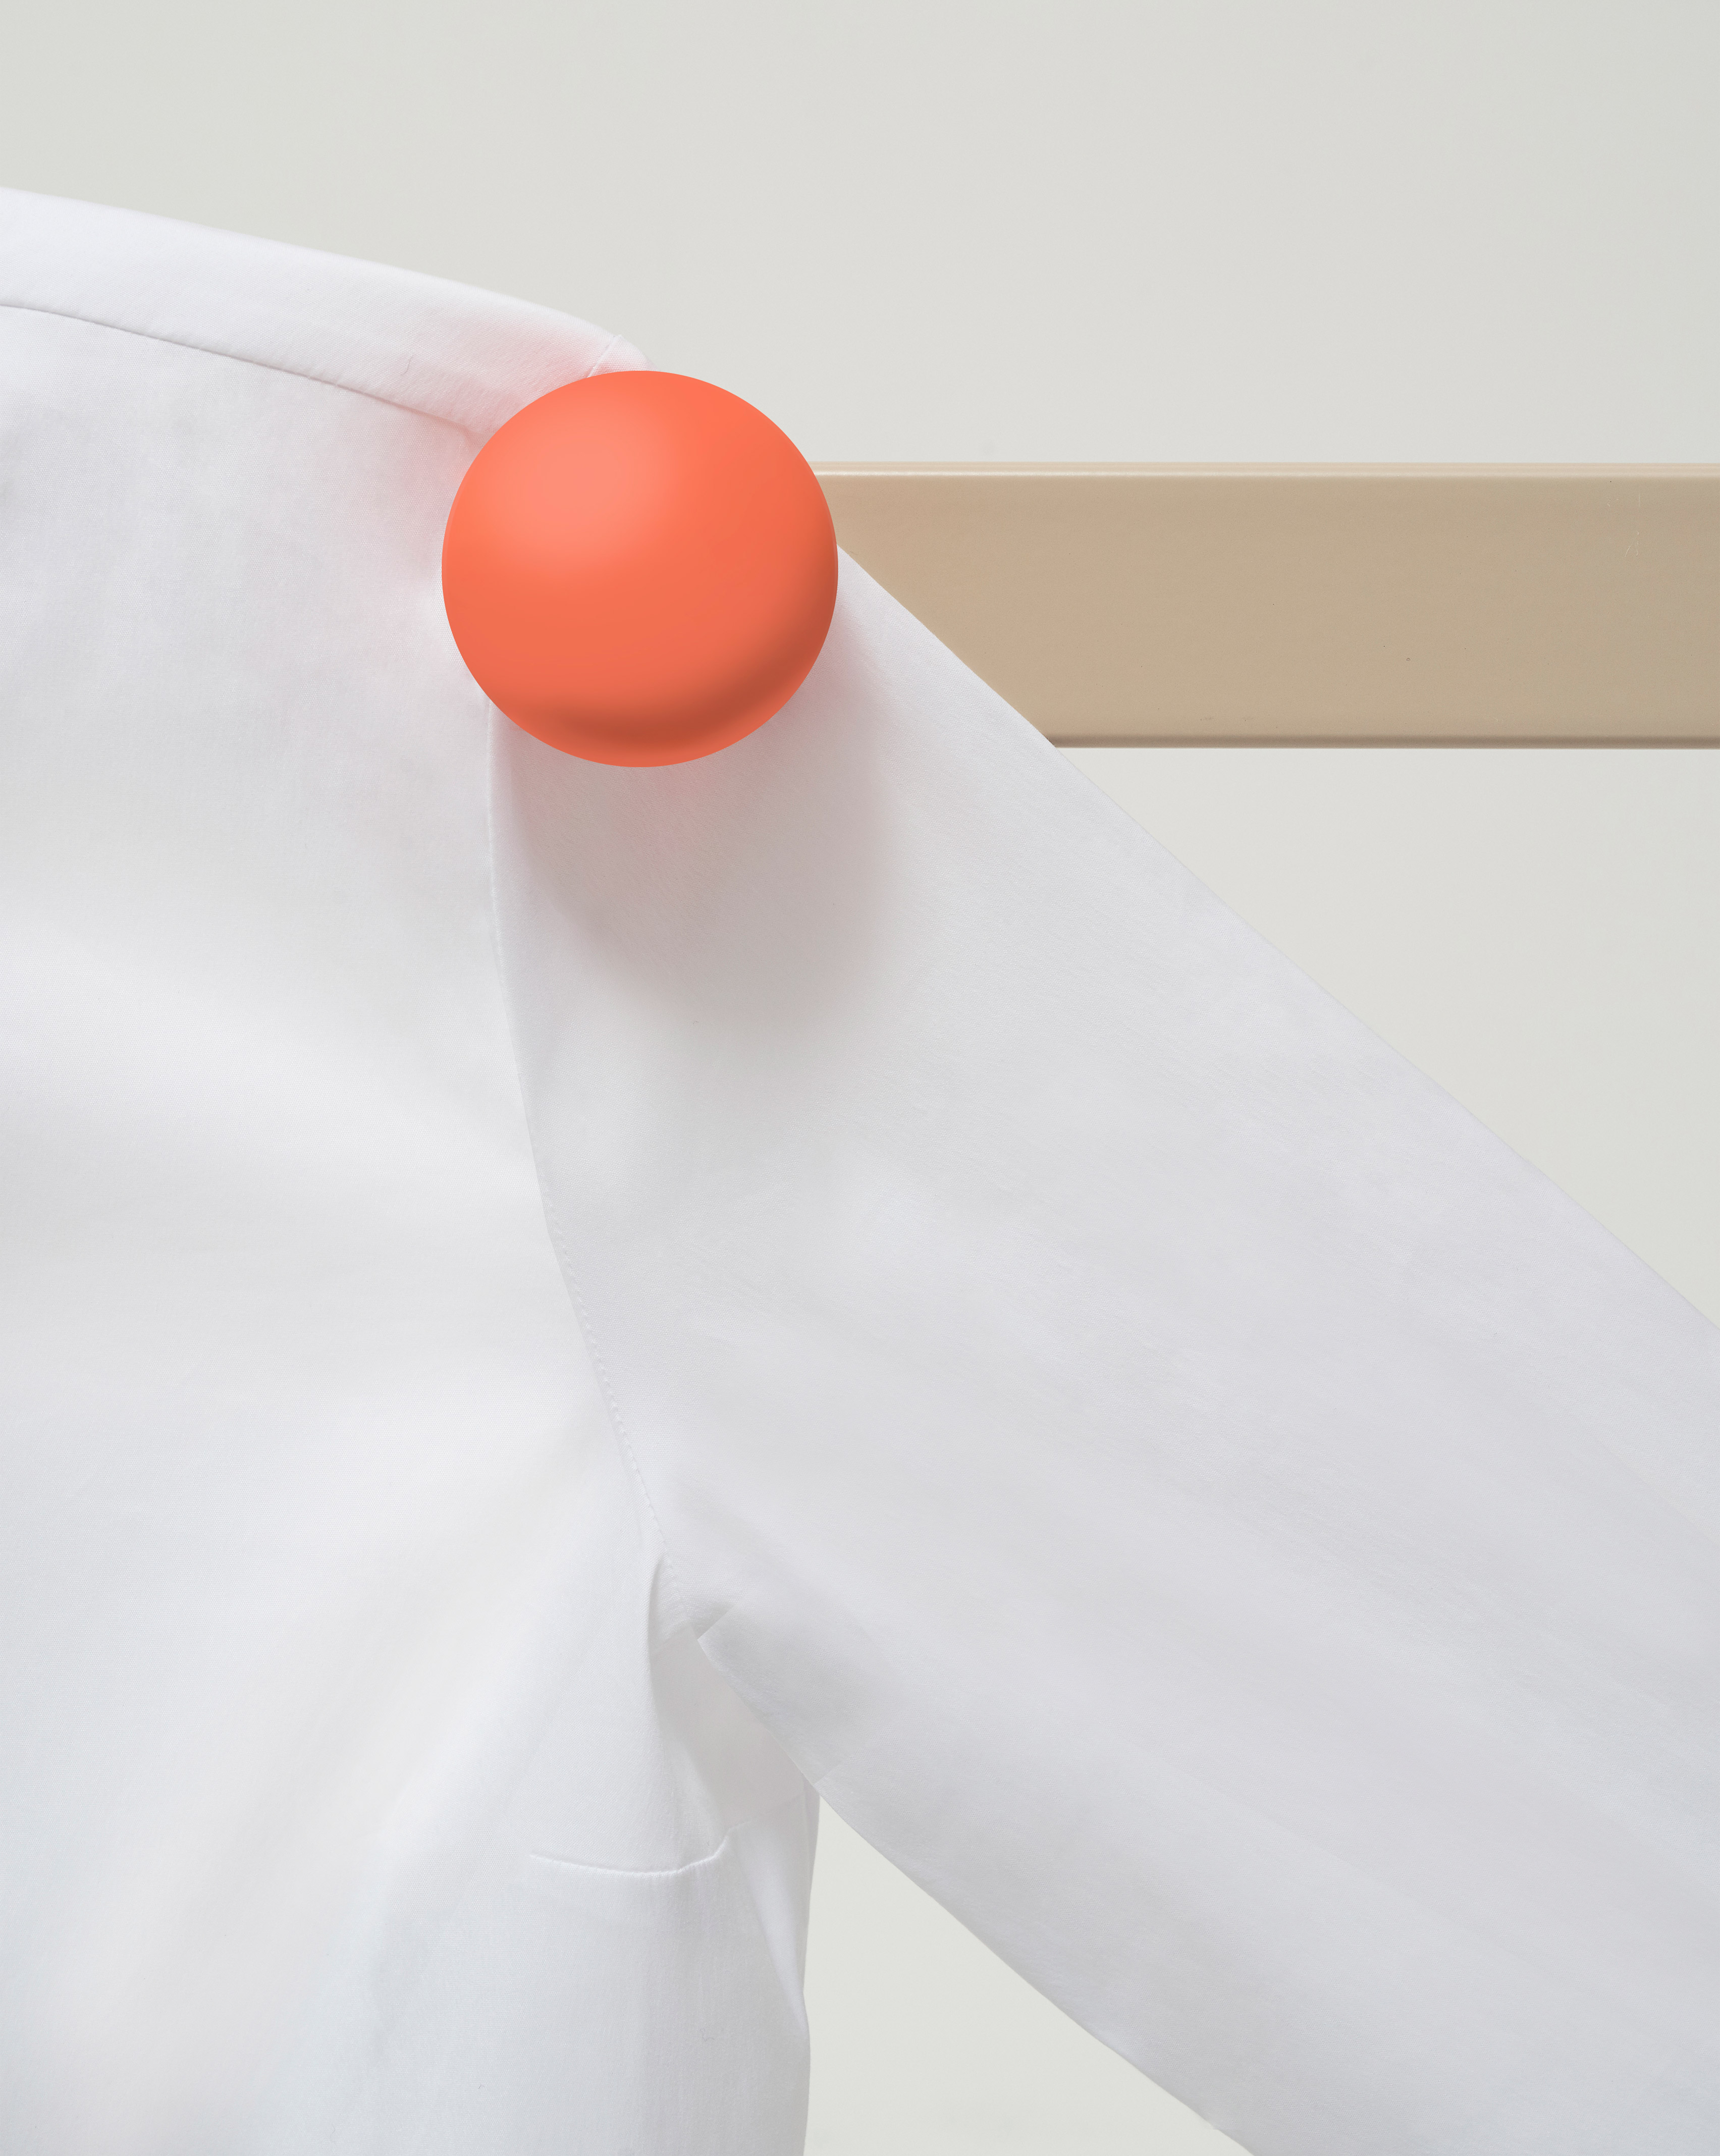 COS and Daniel Emma emphasise the classic white shirt with set of installations